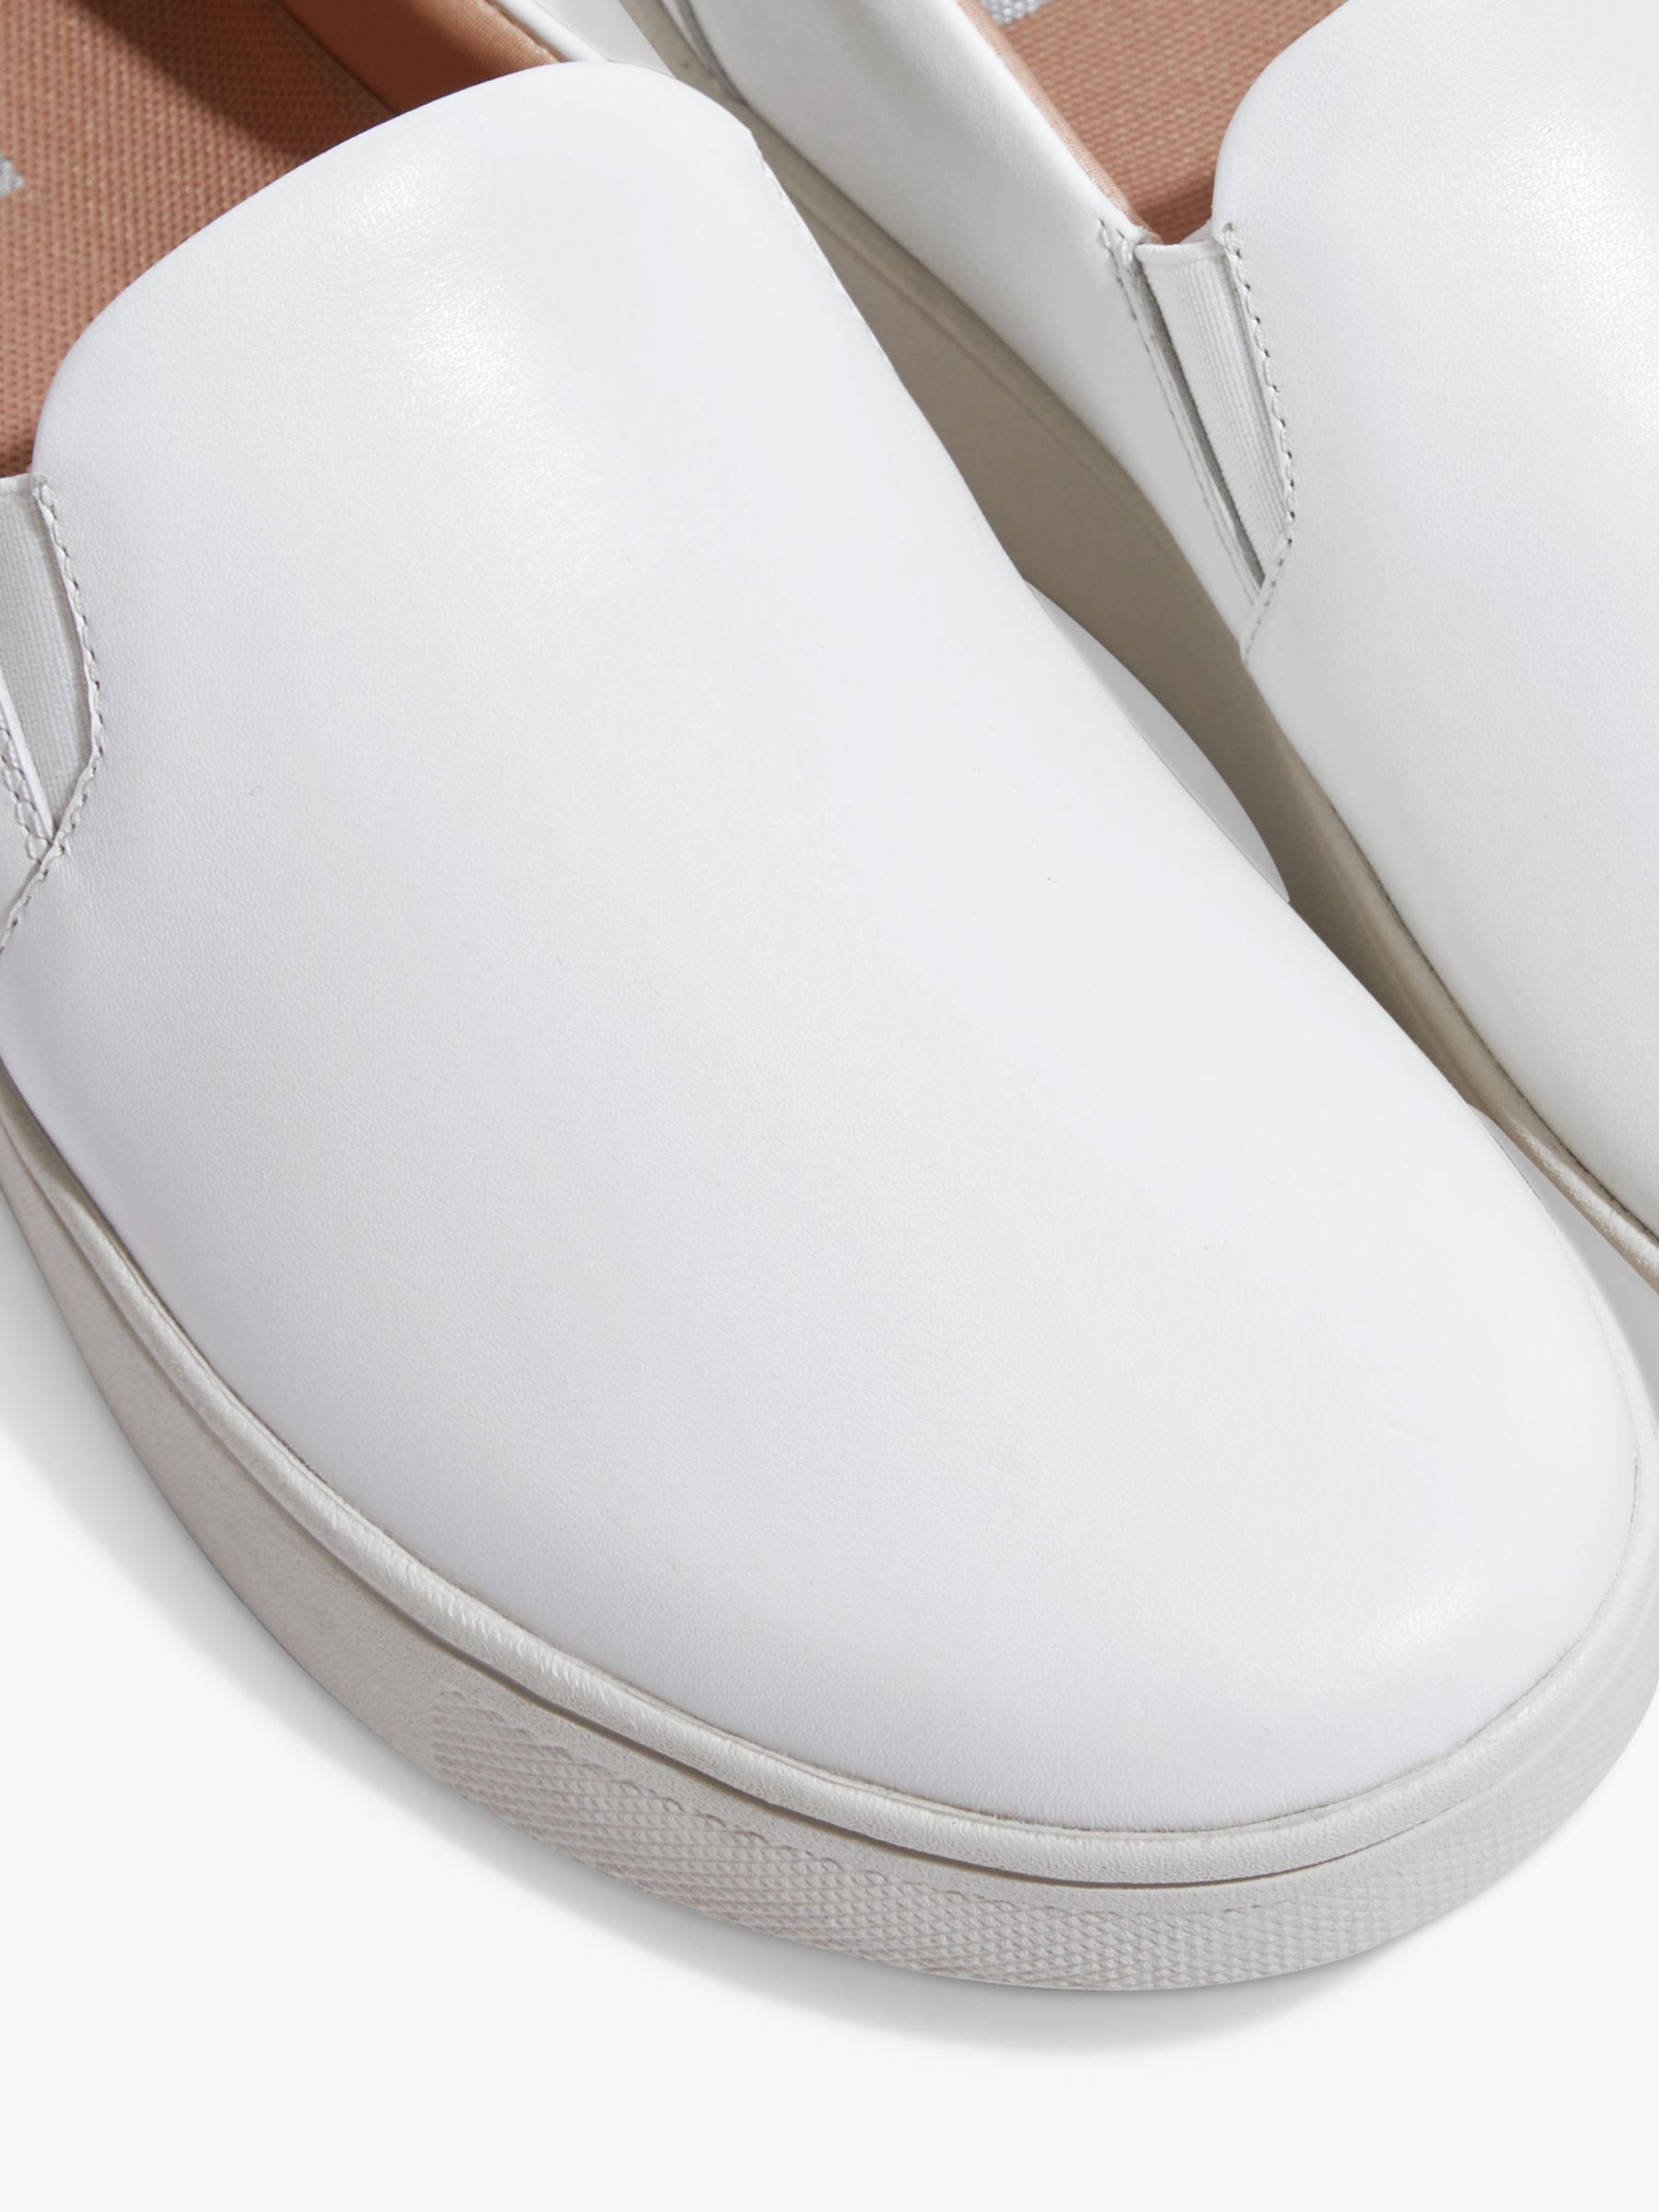 FitFlop Rally Leather Slip On Skate Trainers, Urban White at John Lewis ...